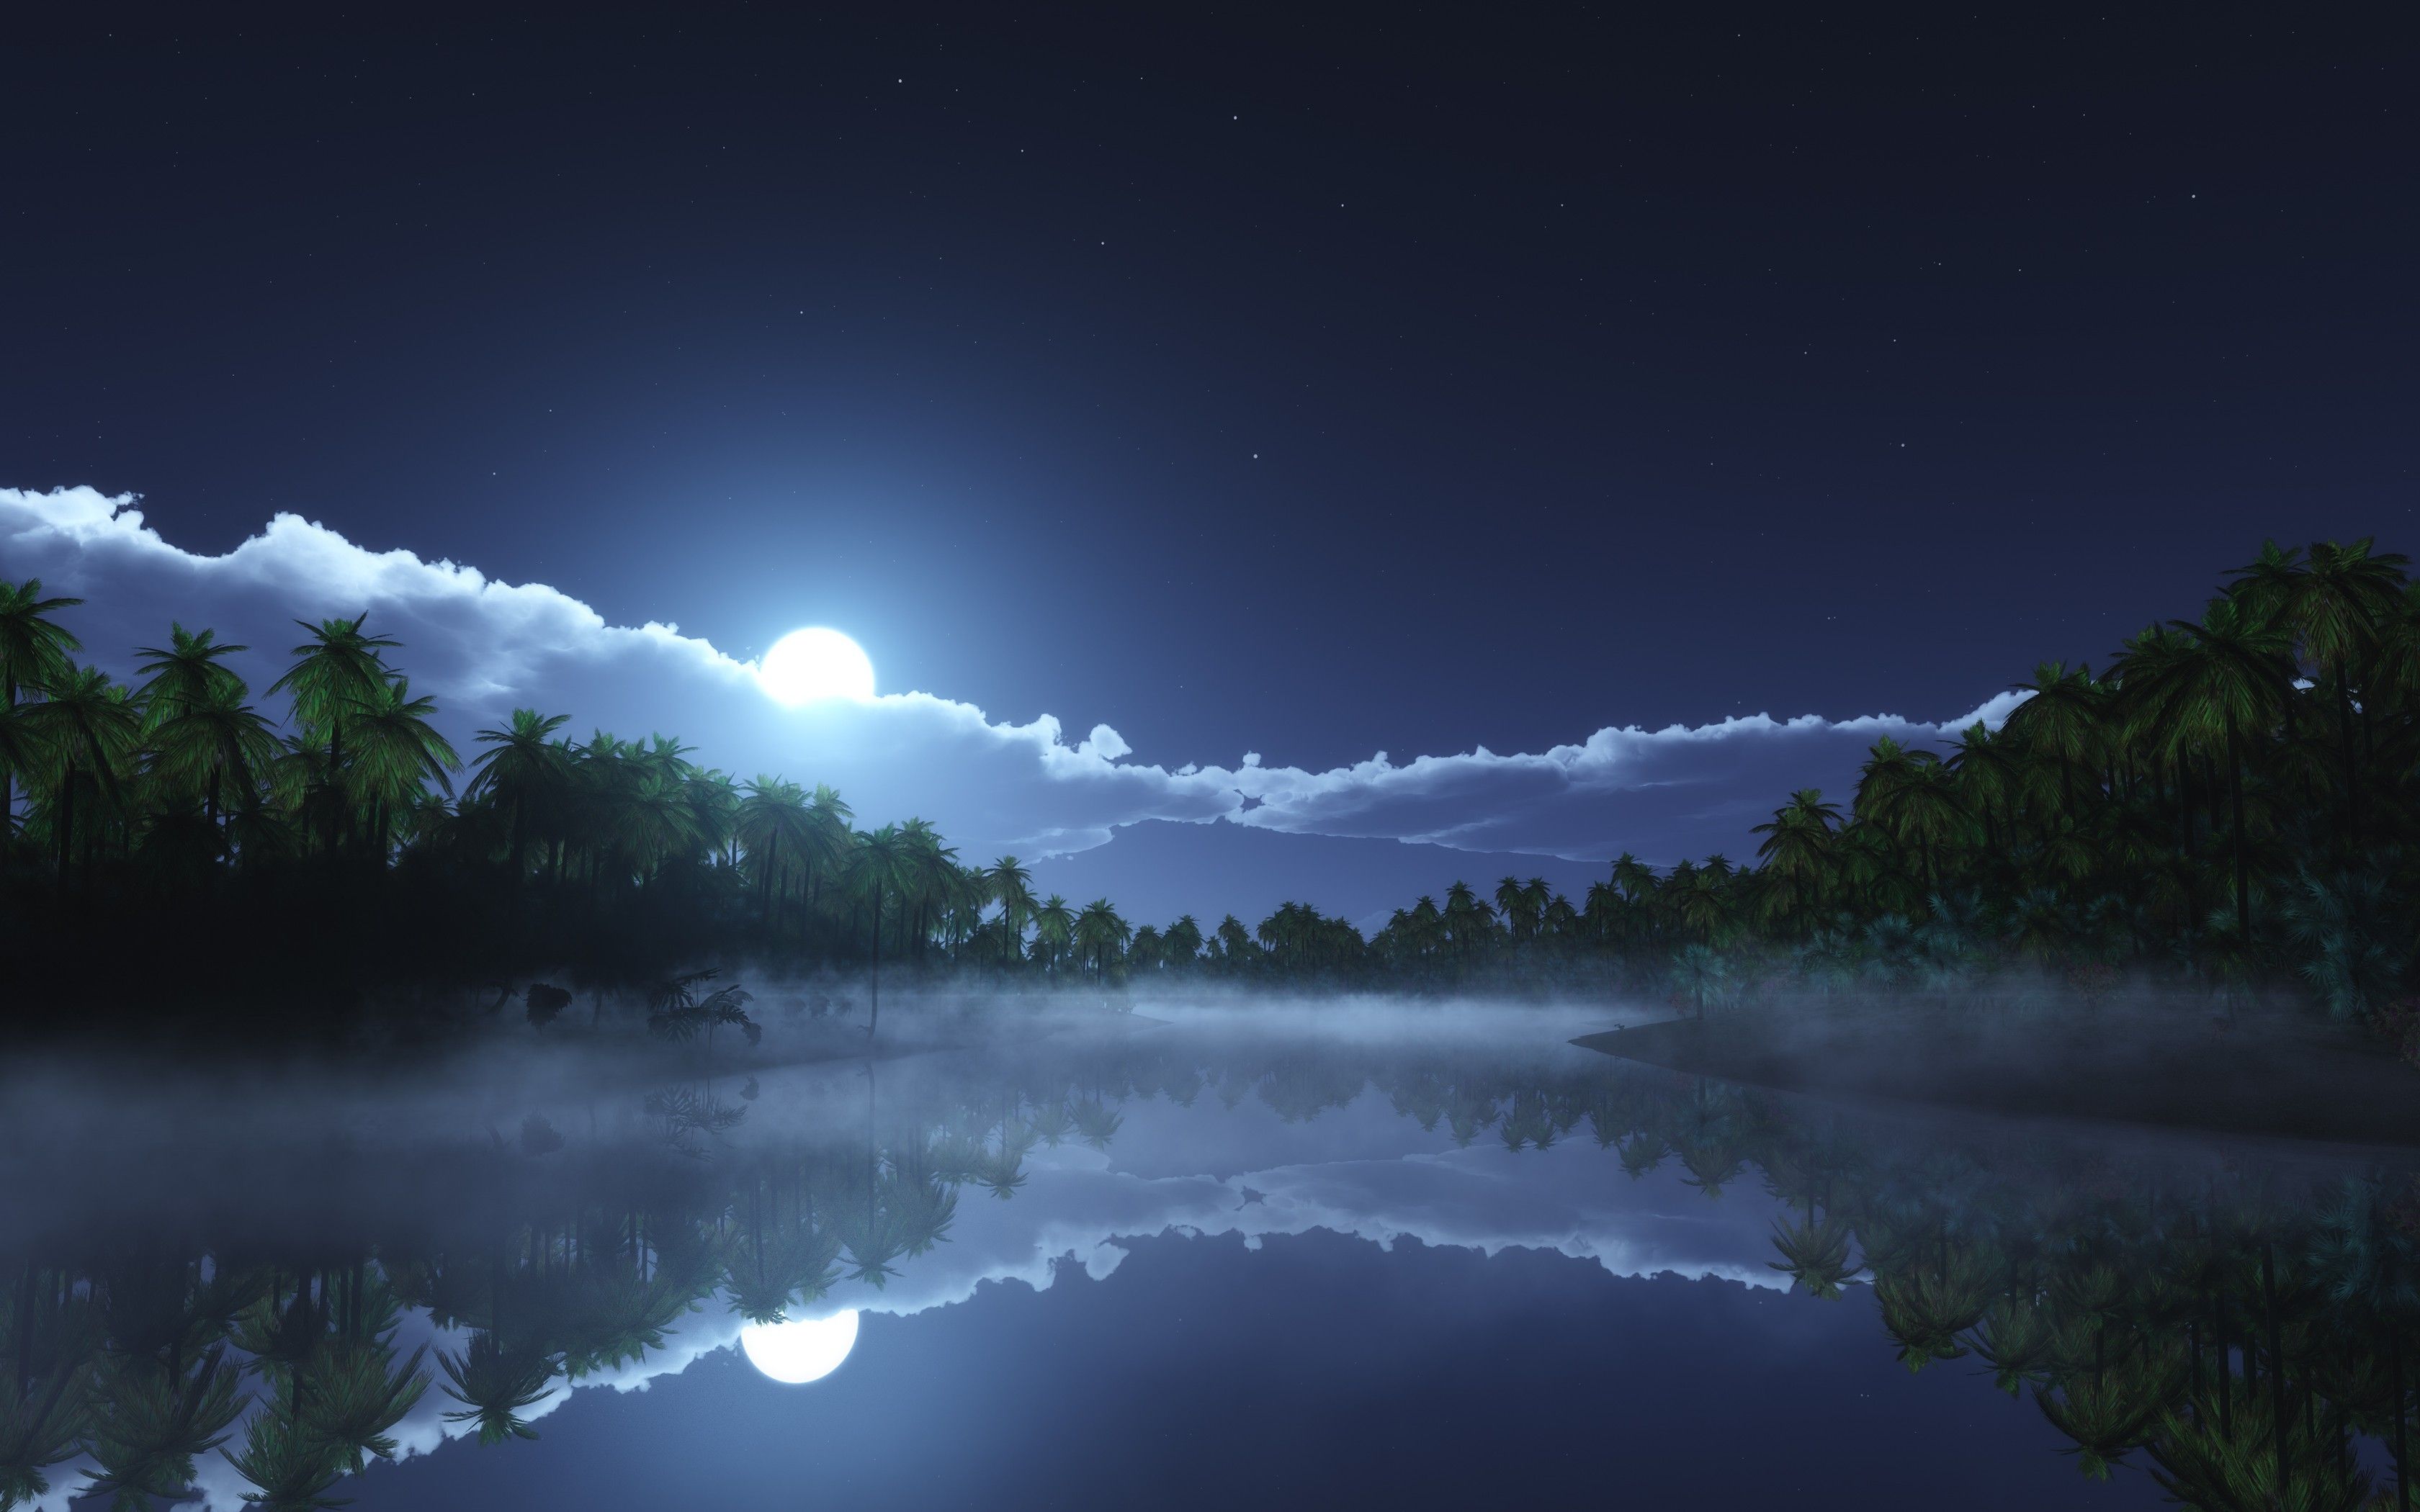 #nature, #tropical, #mist, #reflection, #landscape, #palm trees, #moonlight, #starry night, #clouds, #lake, wallpaper. Mocah.org HD Wallpaper